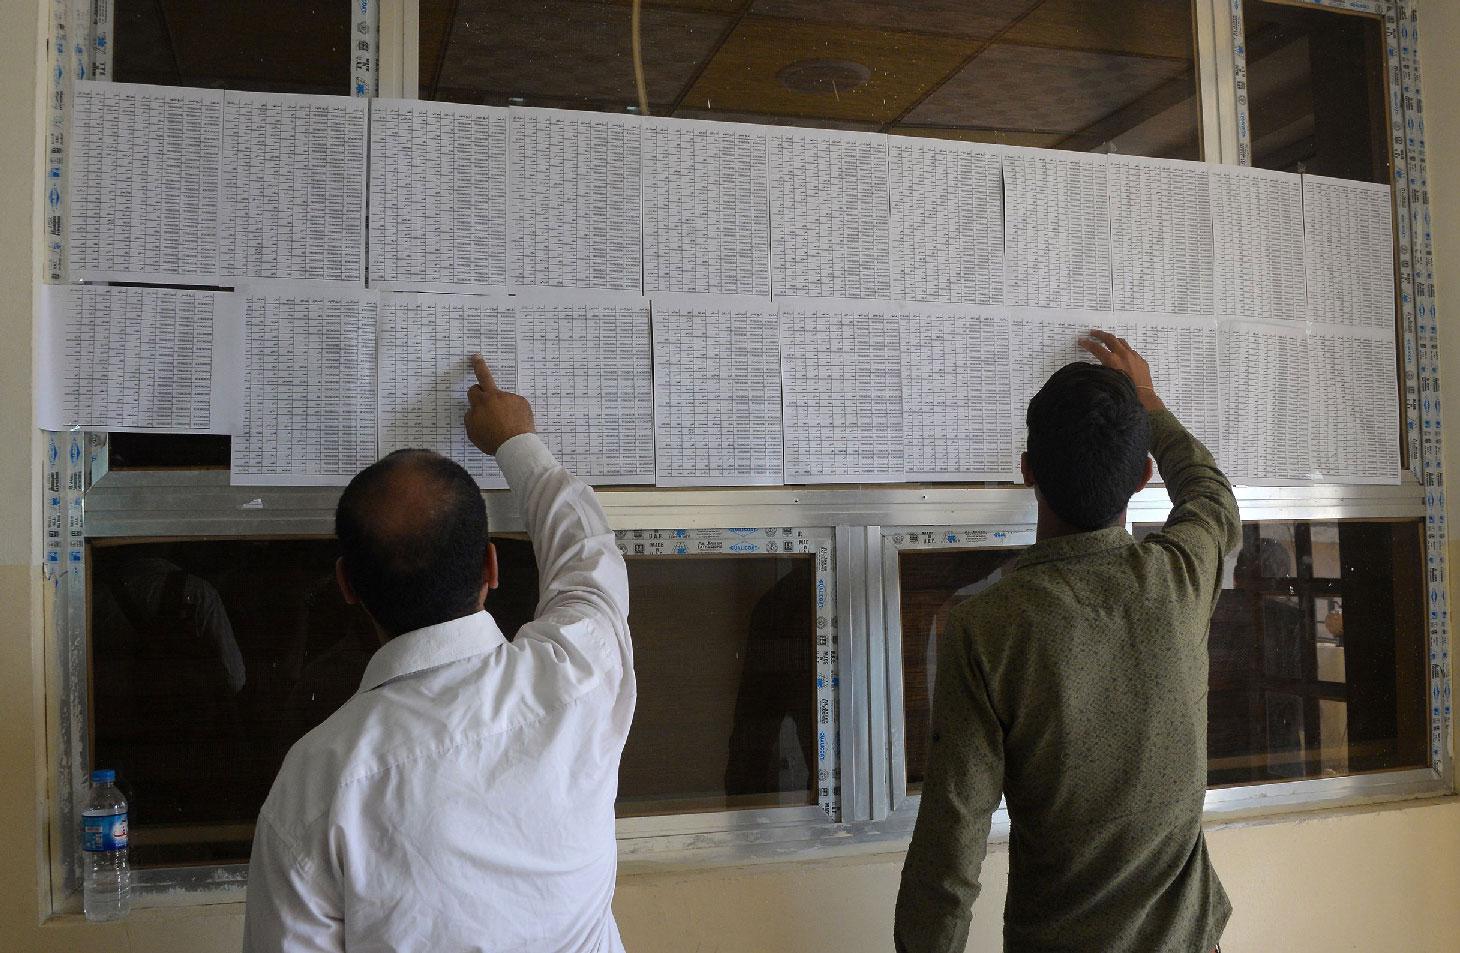 Iraqis check lists of names at the Nineveh governorate building in Mosul.